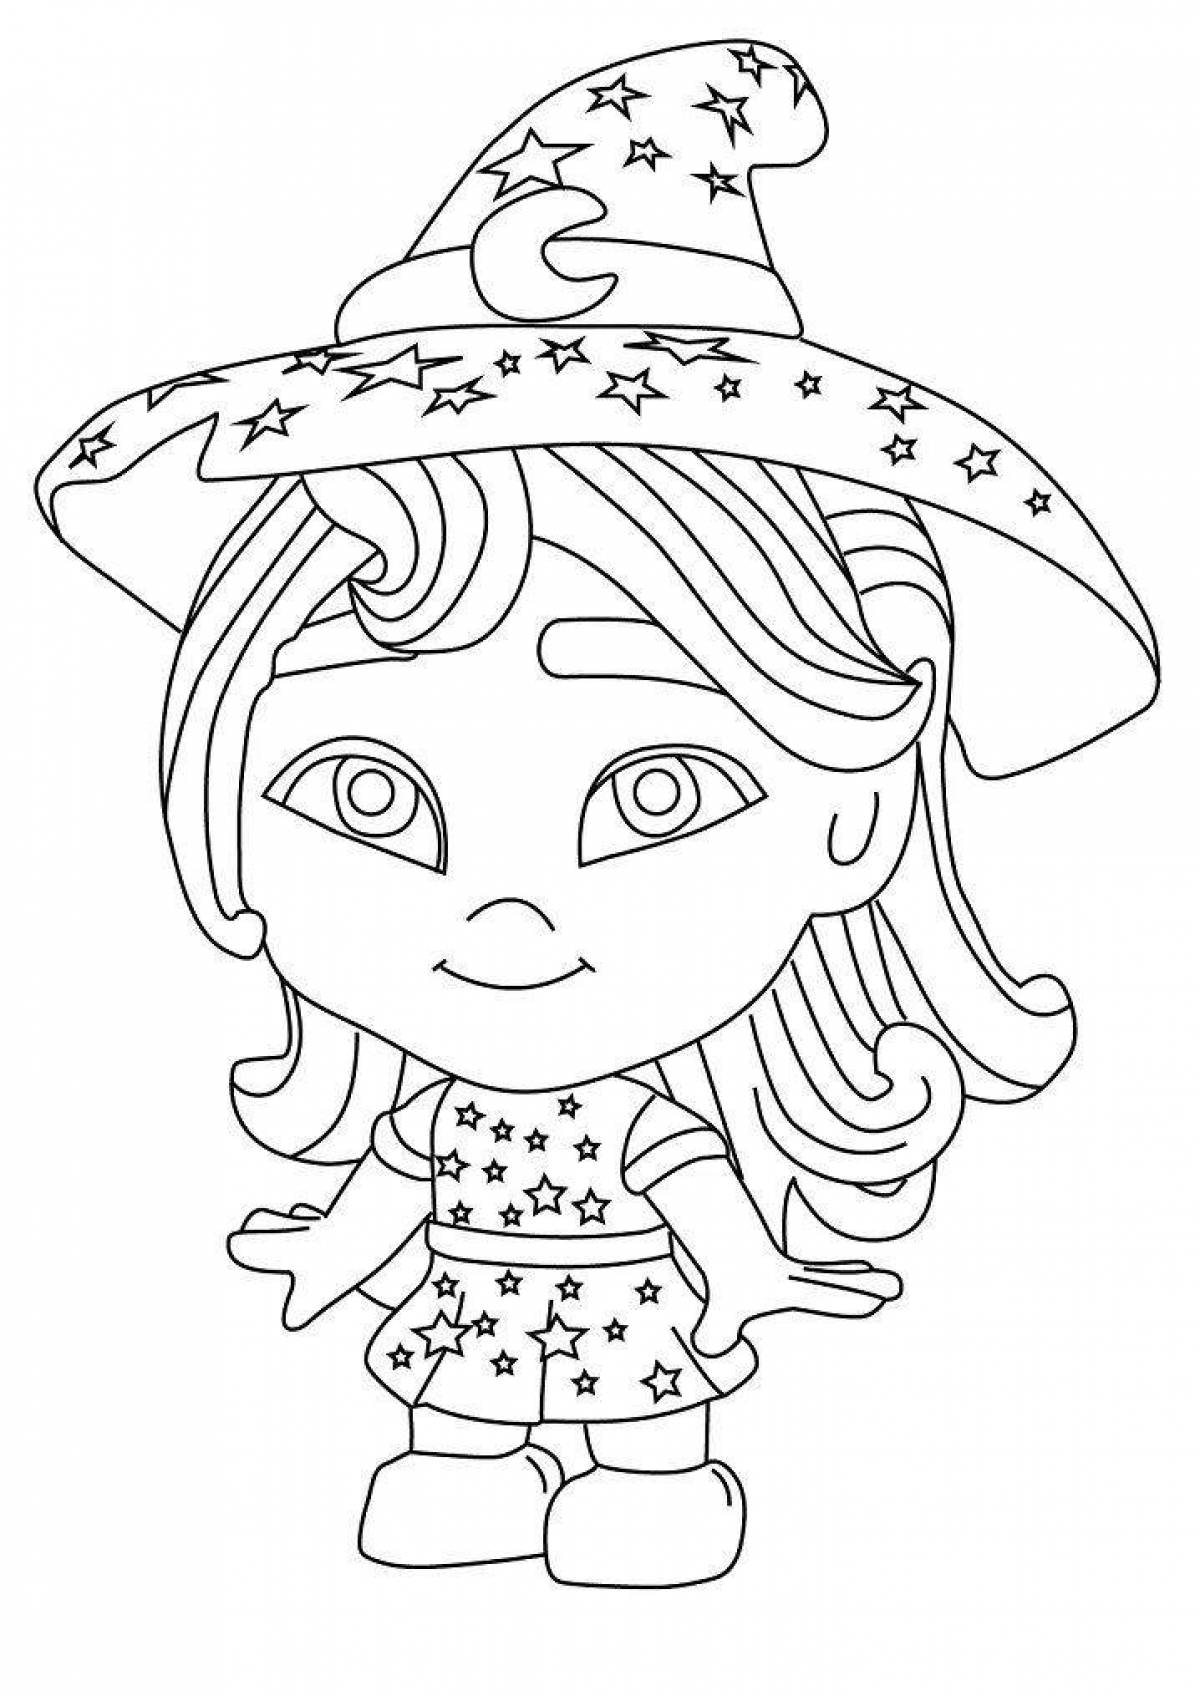 Sparkling super monsters coloring pages